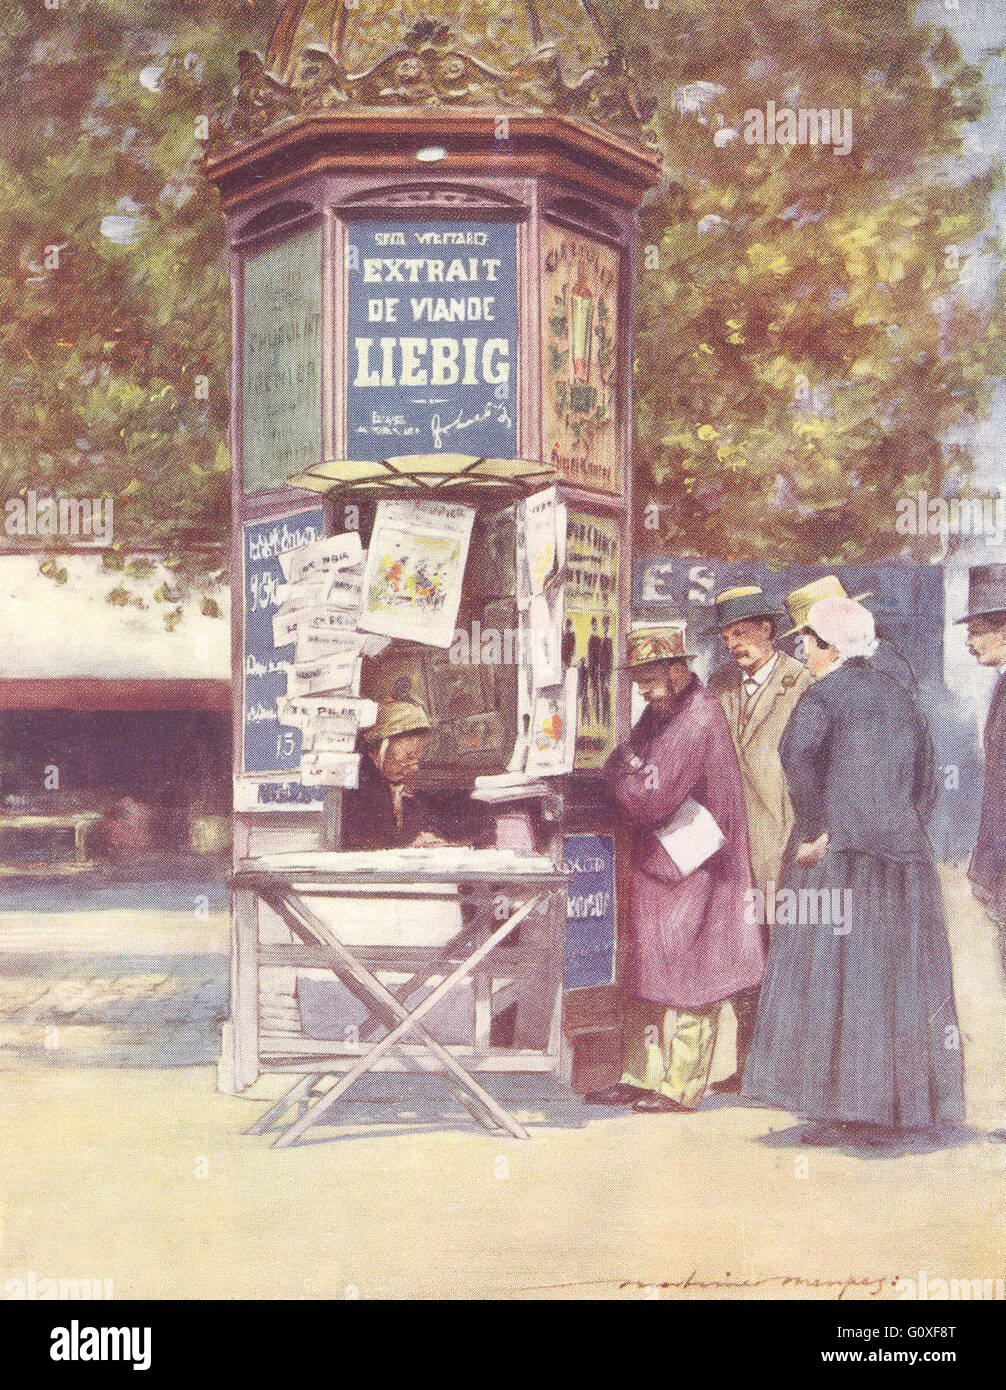 These Vintage Paris Postcards Will Transport You Back in Time